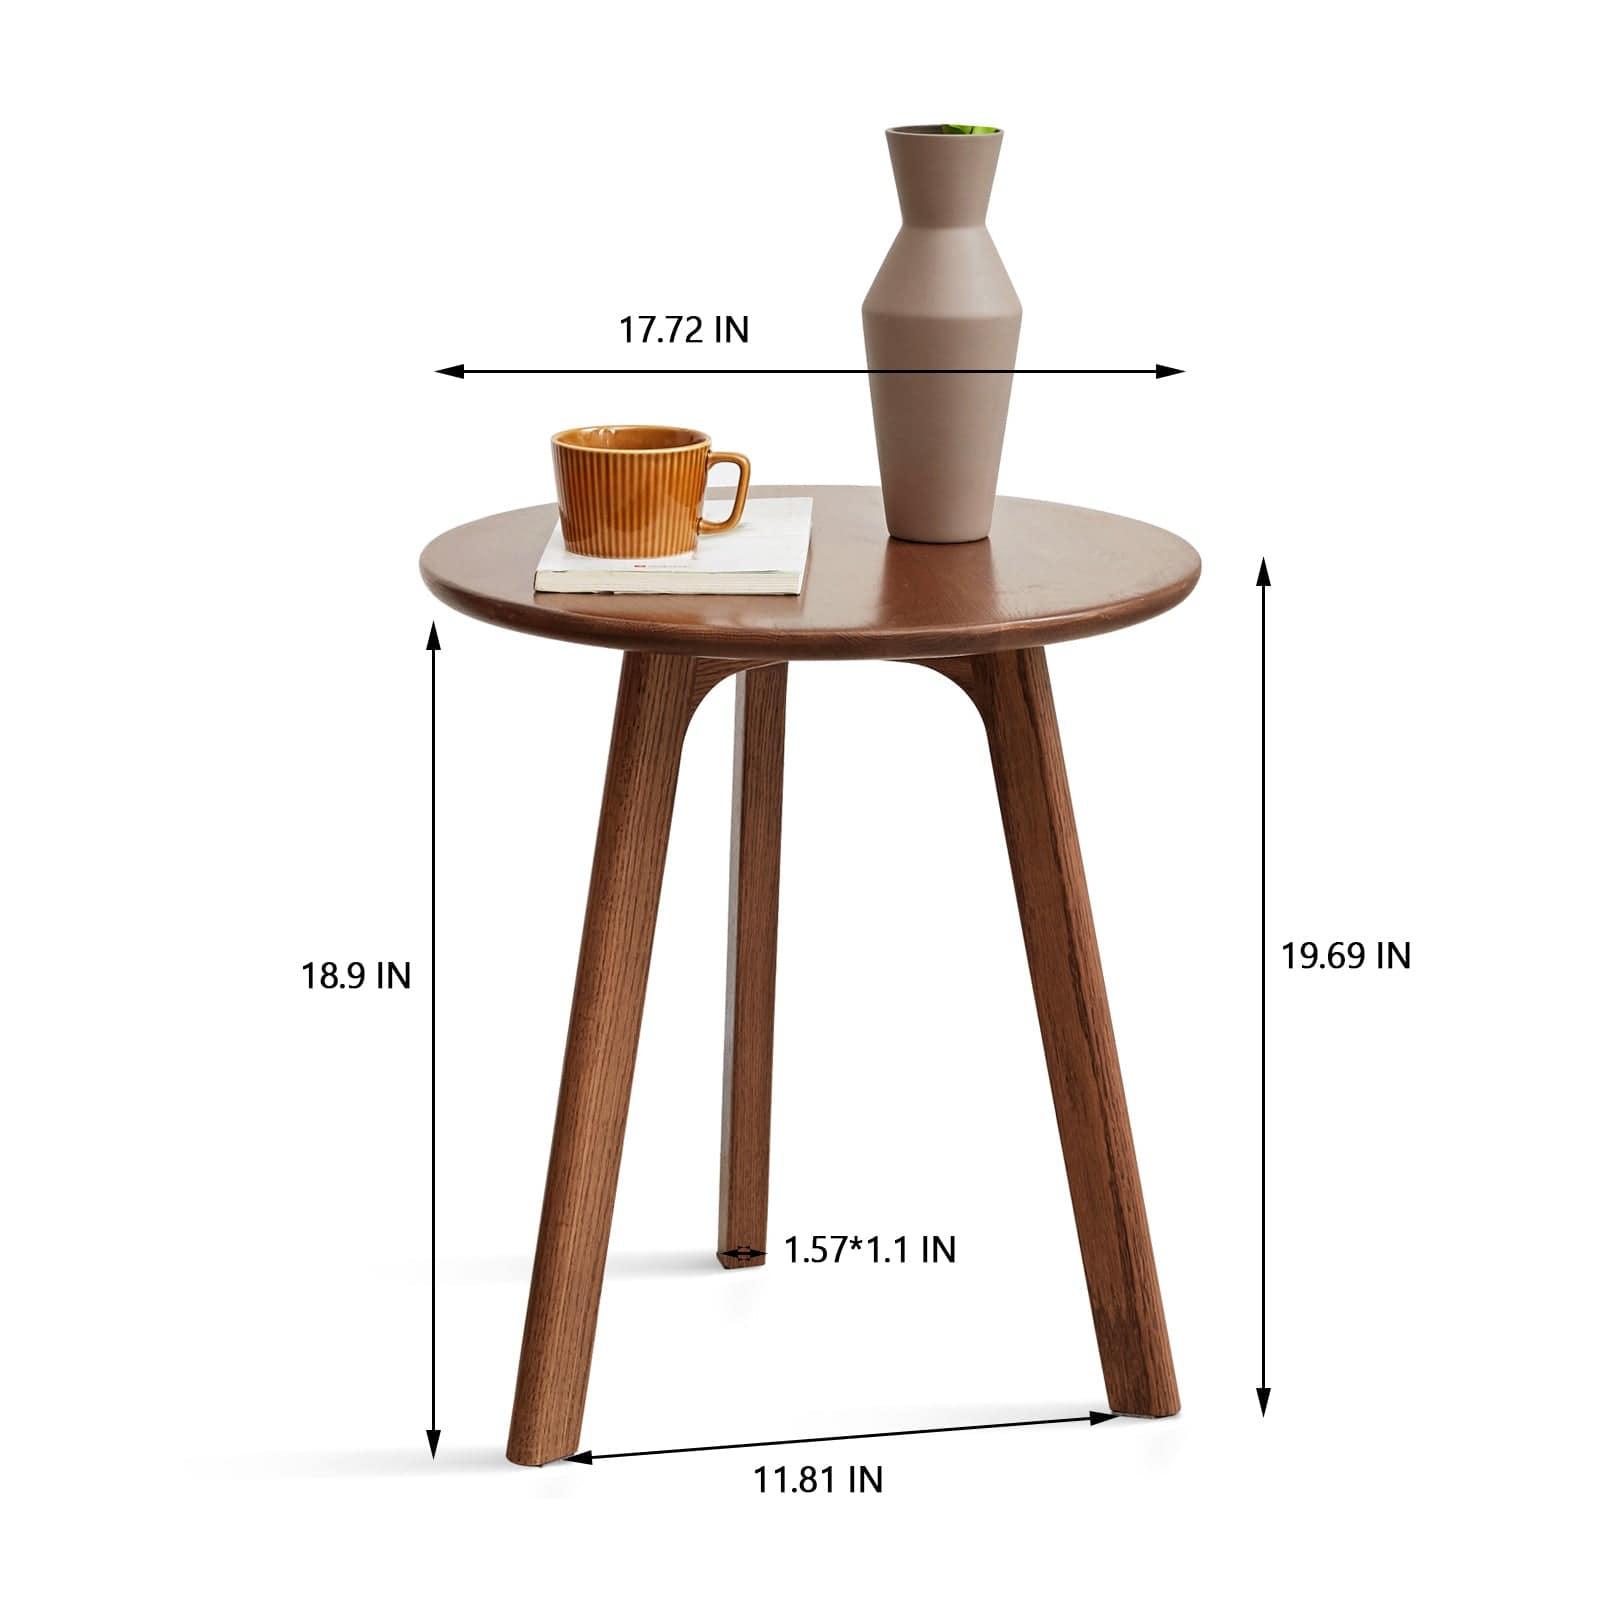 Shop Round End Table- Small End Table Side Table Coffee Table Bedside Table Night Stand for Living Room Bedroom & Balcony, 100% Natural Solid Oak Wood Easy to Assemble Mademoiselle Home Decor